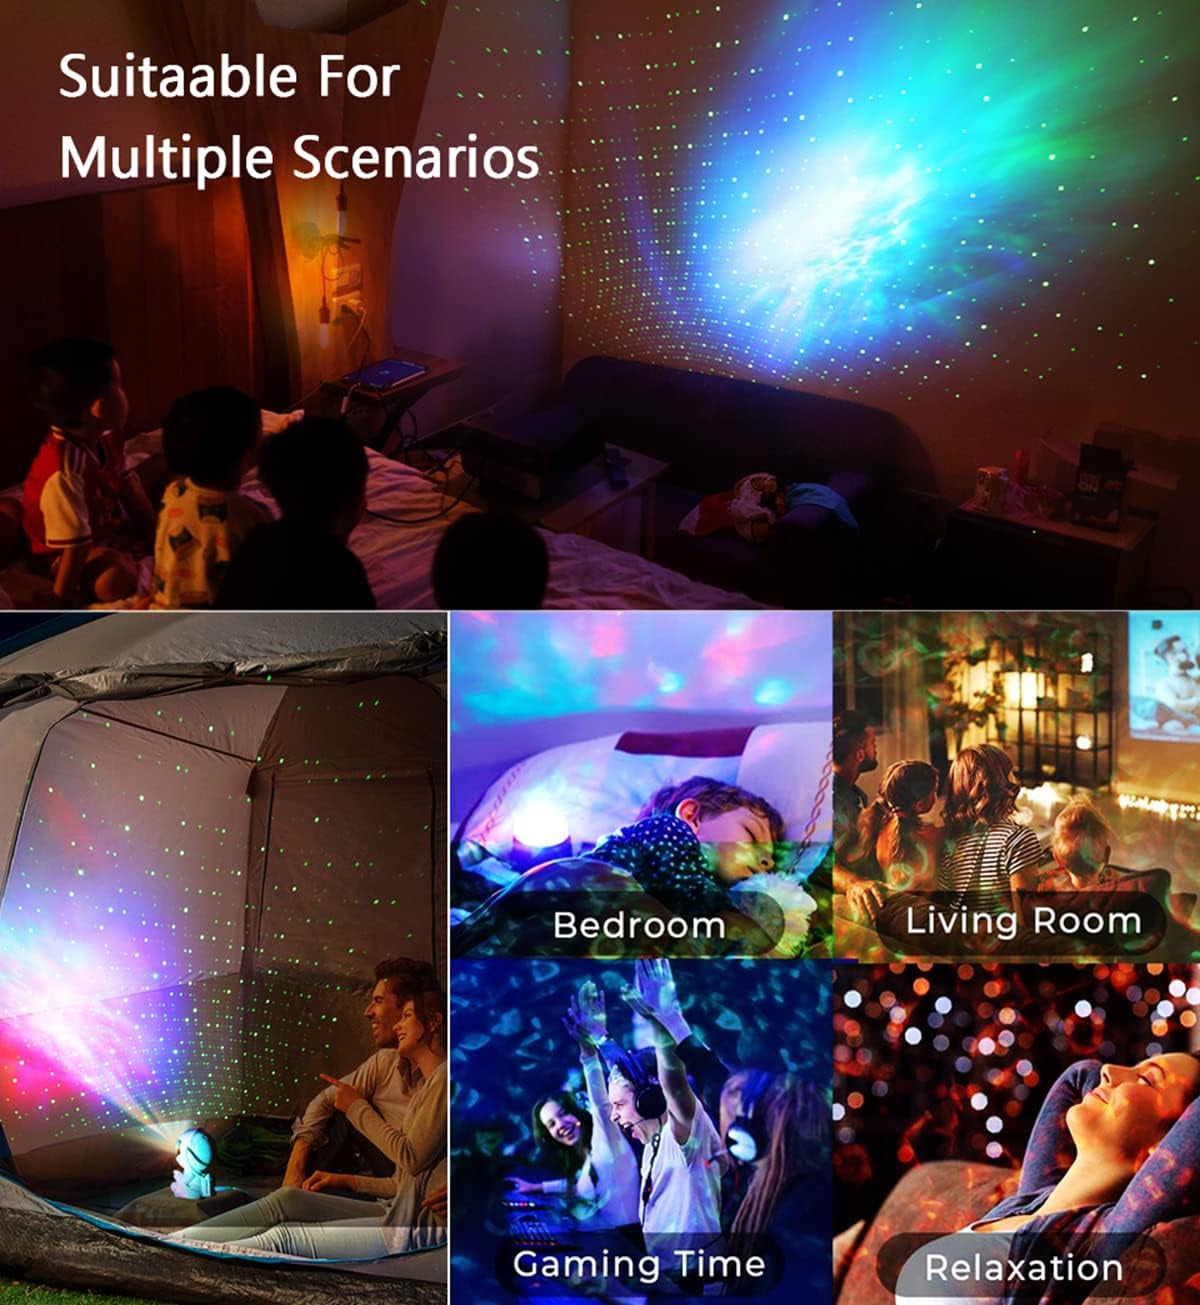 Star Projector Galaxy Night Light, Starry Nebula Ceiling LED Lamp Room Decor with Remote, Astronaut Gifts for Kids Adults for Bedroom, Christmas, Halloween, Birthdays, Valentine'S Day